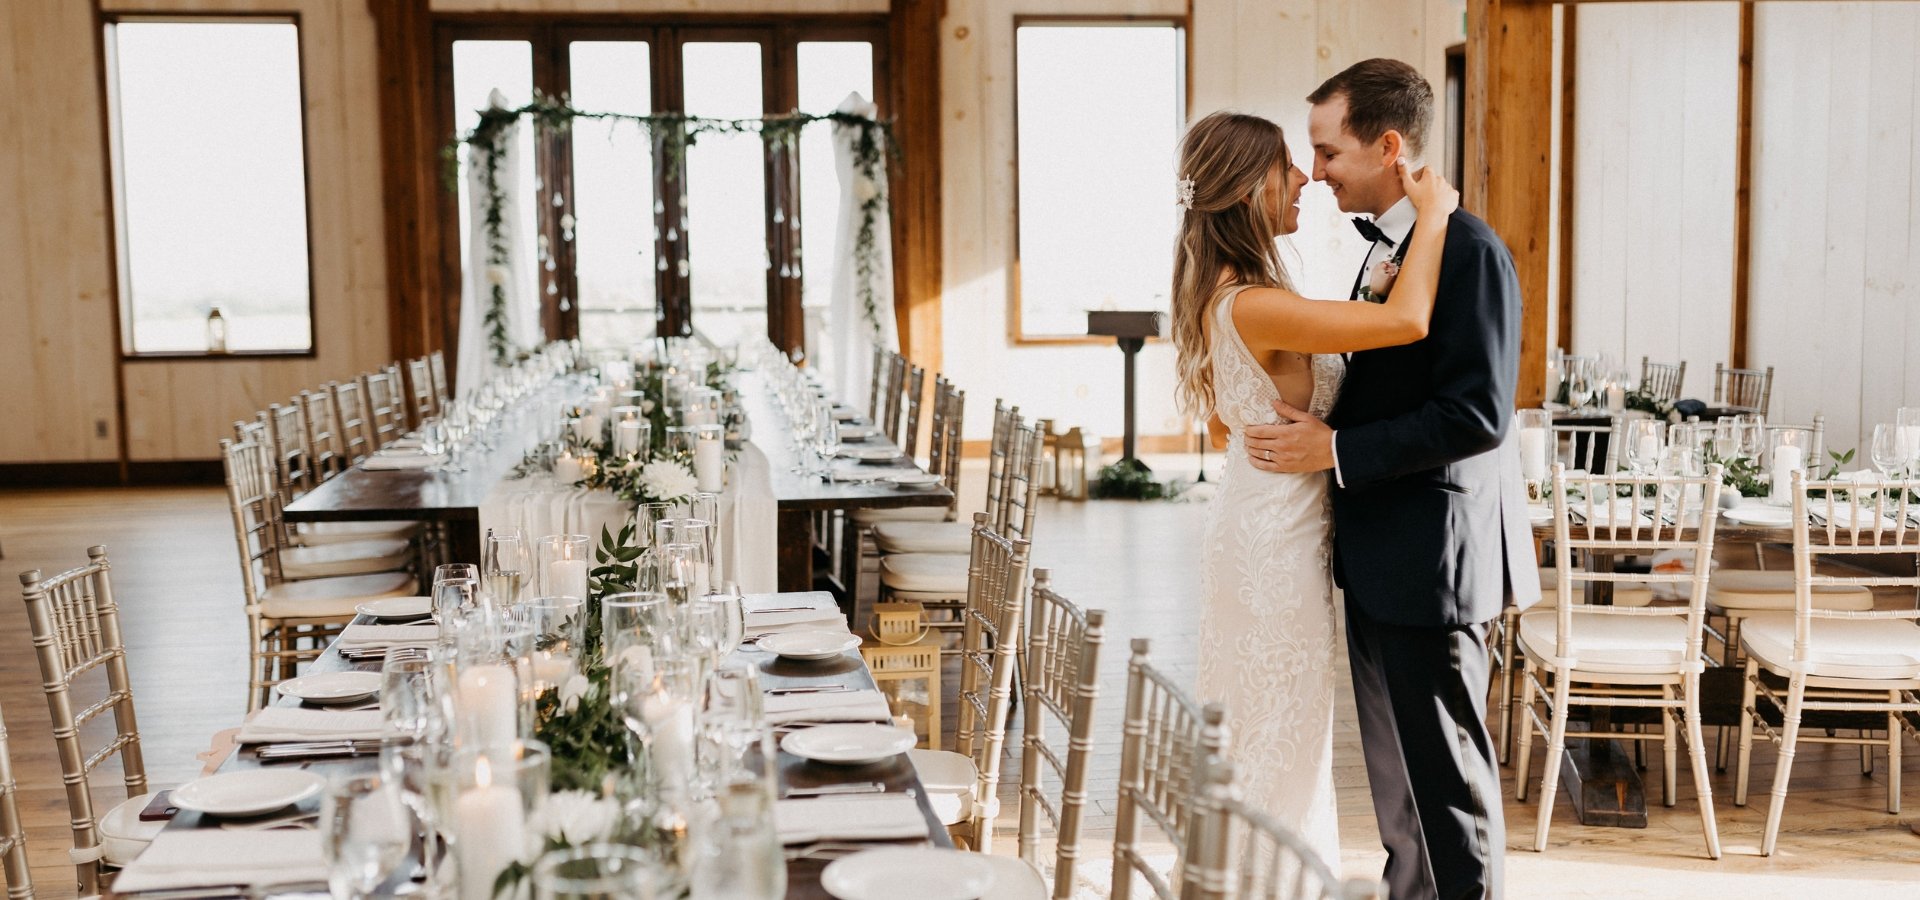 Hero image for Jamie and Clark’s Romantically Rustic Wedding at Earth to Table: The Farm